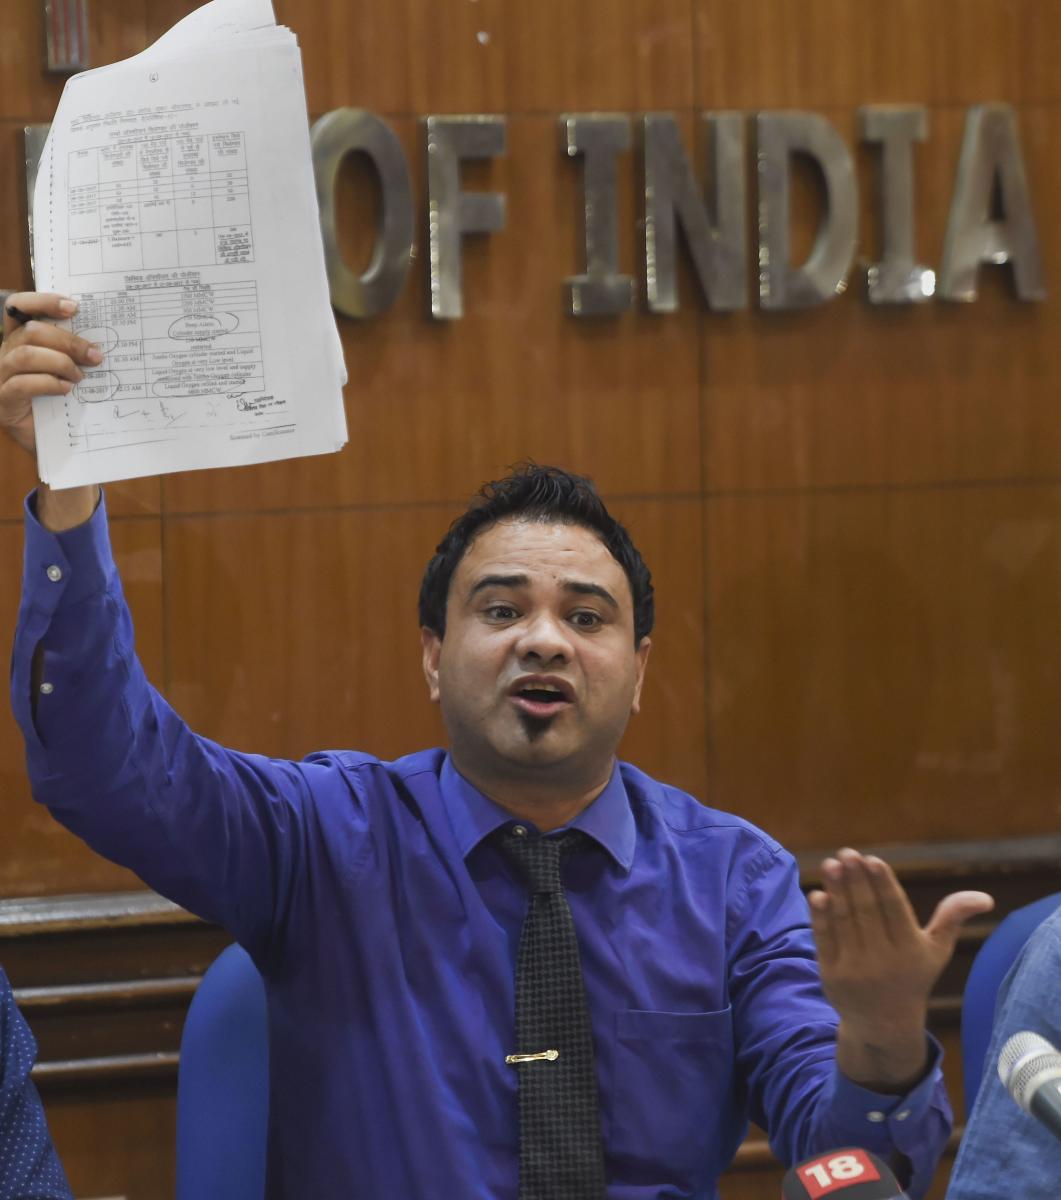 Allahabad High Court orders immediate release of Dr. Kafeel Khan, revoking all the orders implied under the National Security Act  